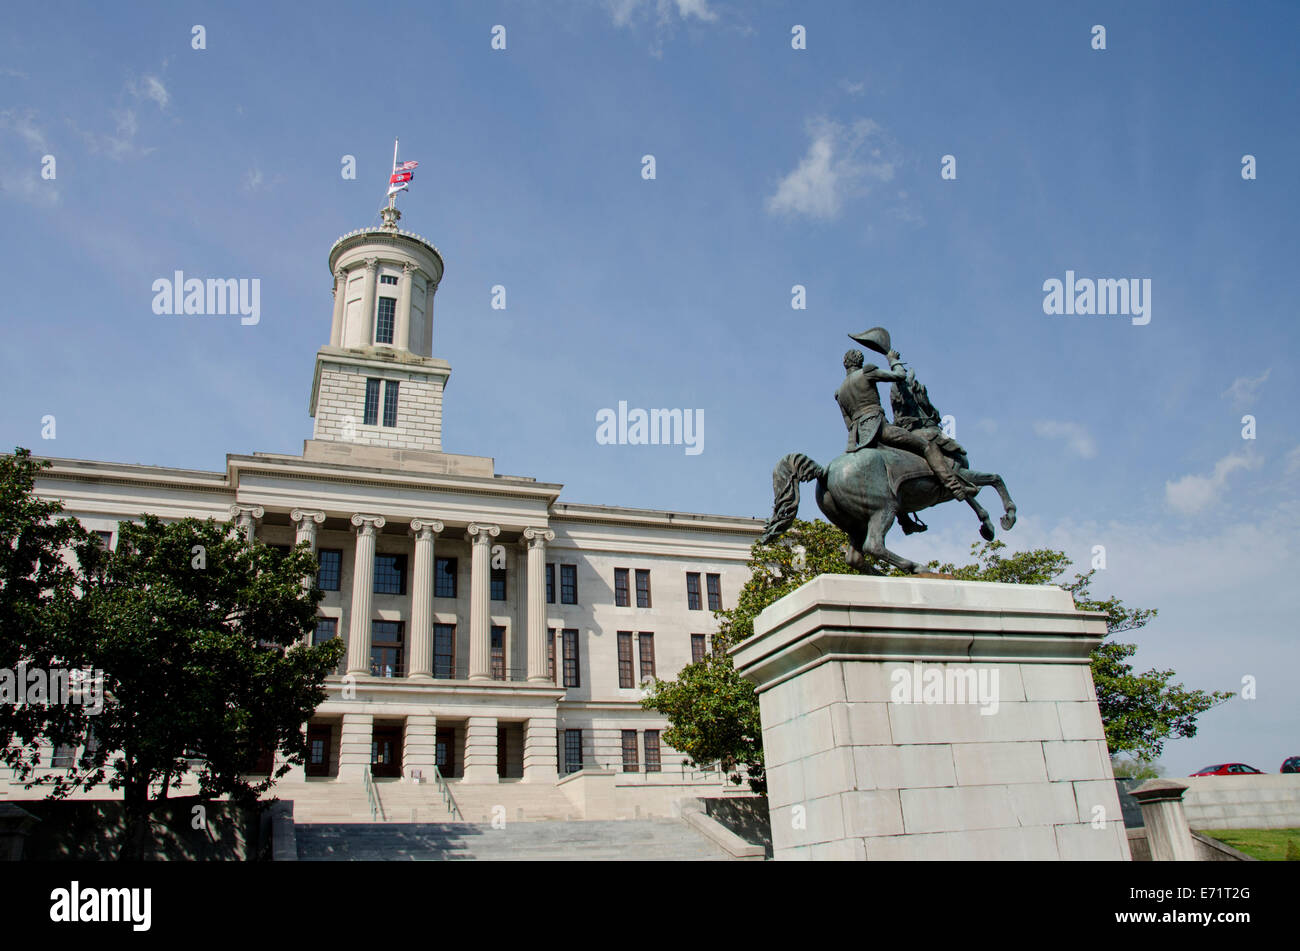 USA, Tennessee, Nashville. Tennessee State Capitol, National Register of Historic Landmarks. Statue of Andrew Jackson. Stock Photo